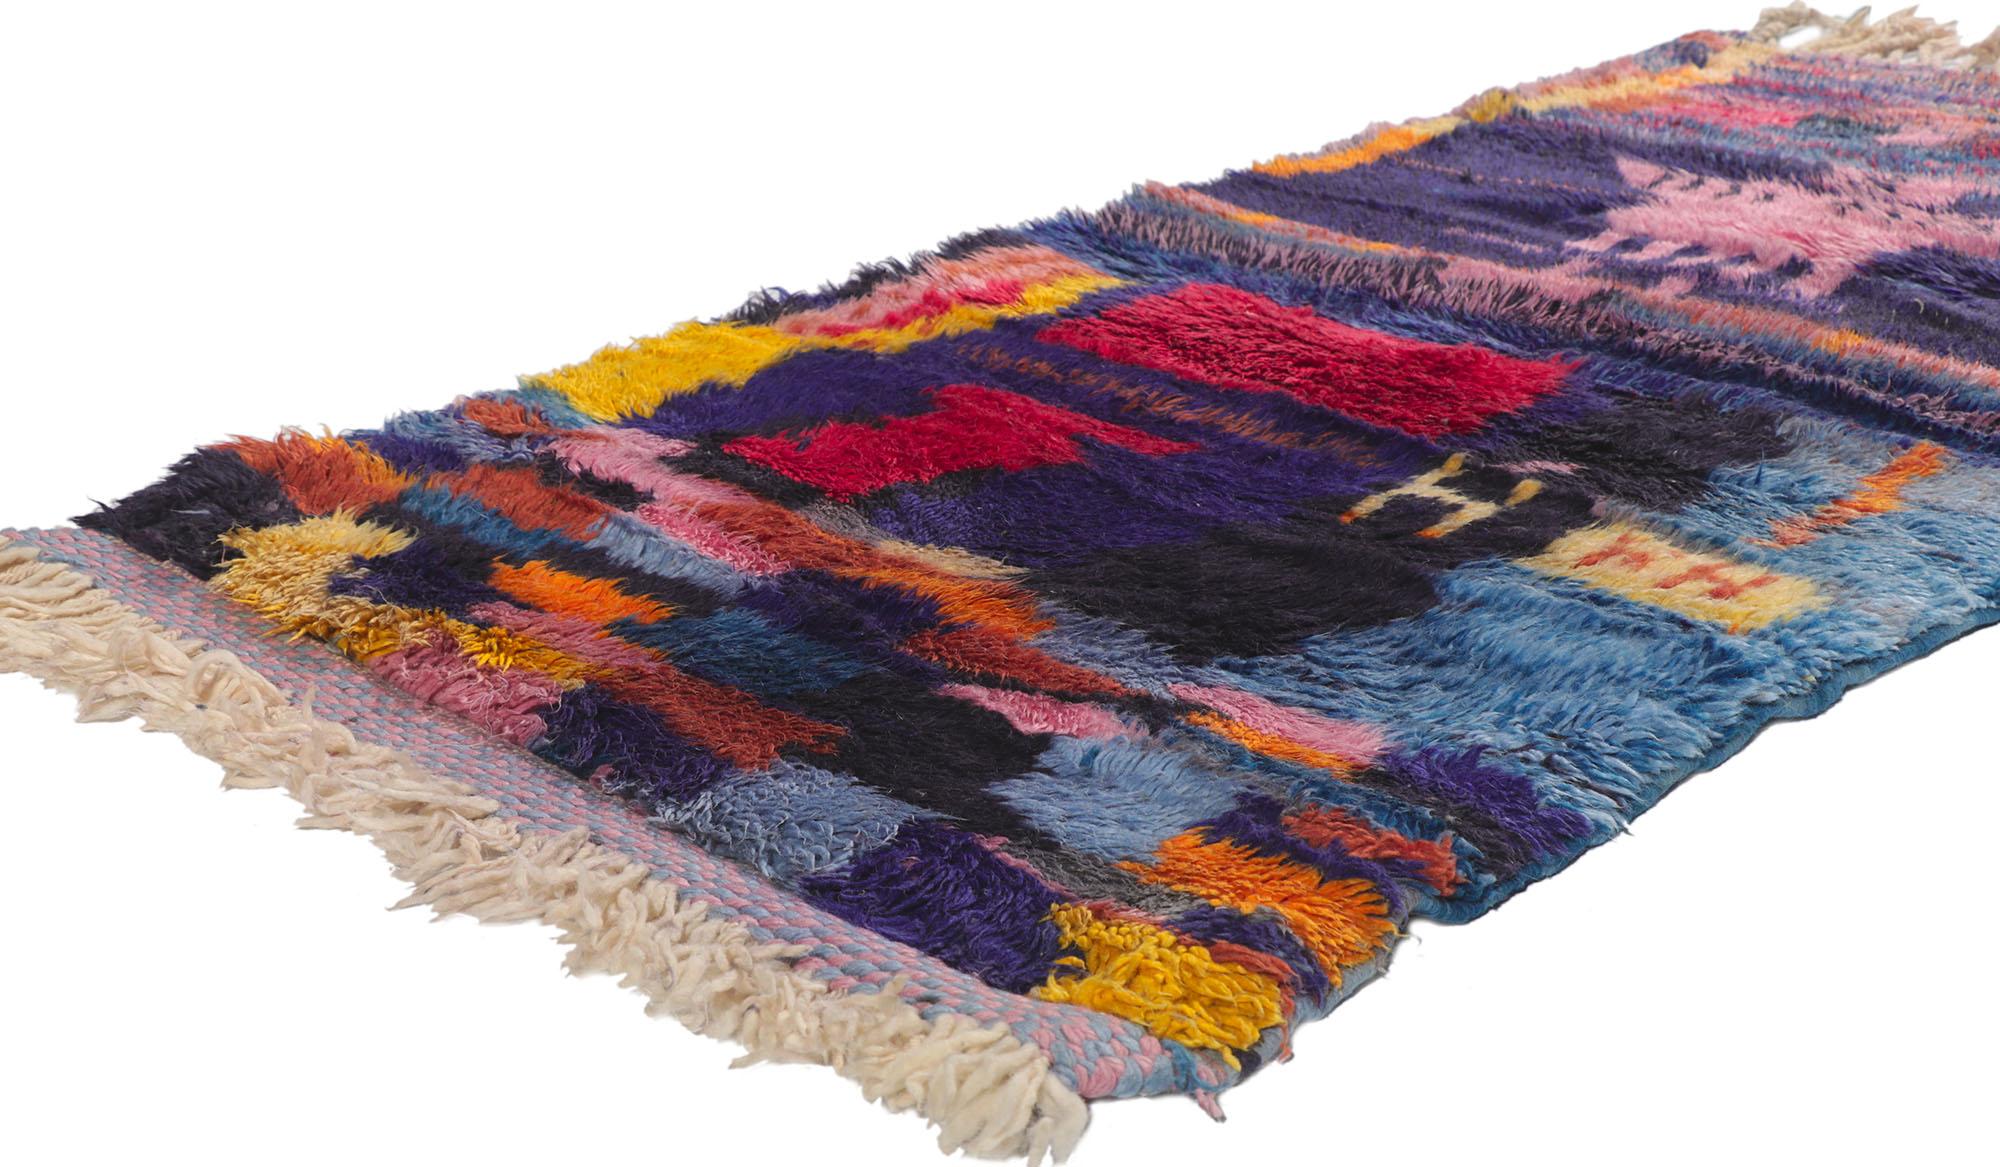 21113 Colorful Moroccan Beni Ourain Rug, 02'07 x 05'07. Colorful Beni Ourain rugs, stemming from the Beni Ourain tribes nestled in the Atlas Mountains of Morocco, diverge boldly from traditional aesthetics. Unlike their neutral-toned counterparts,